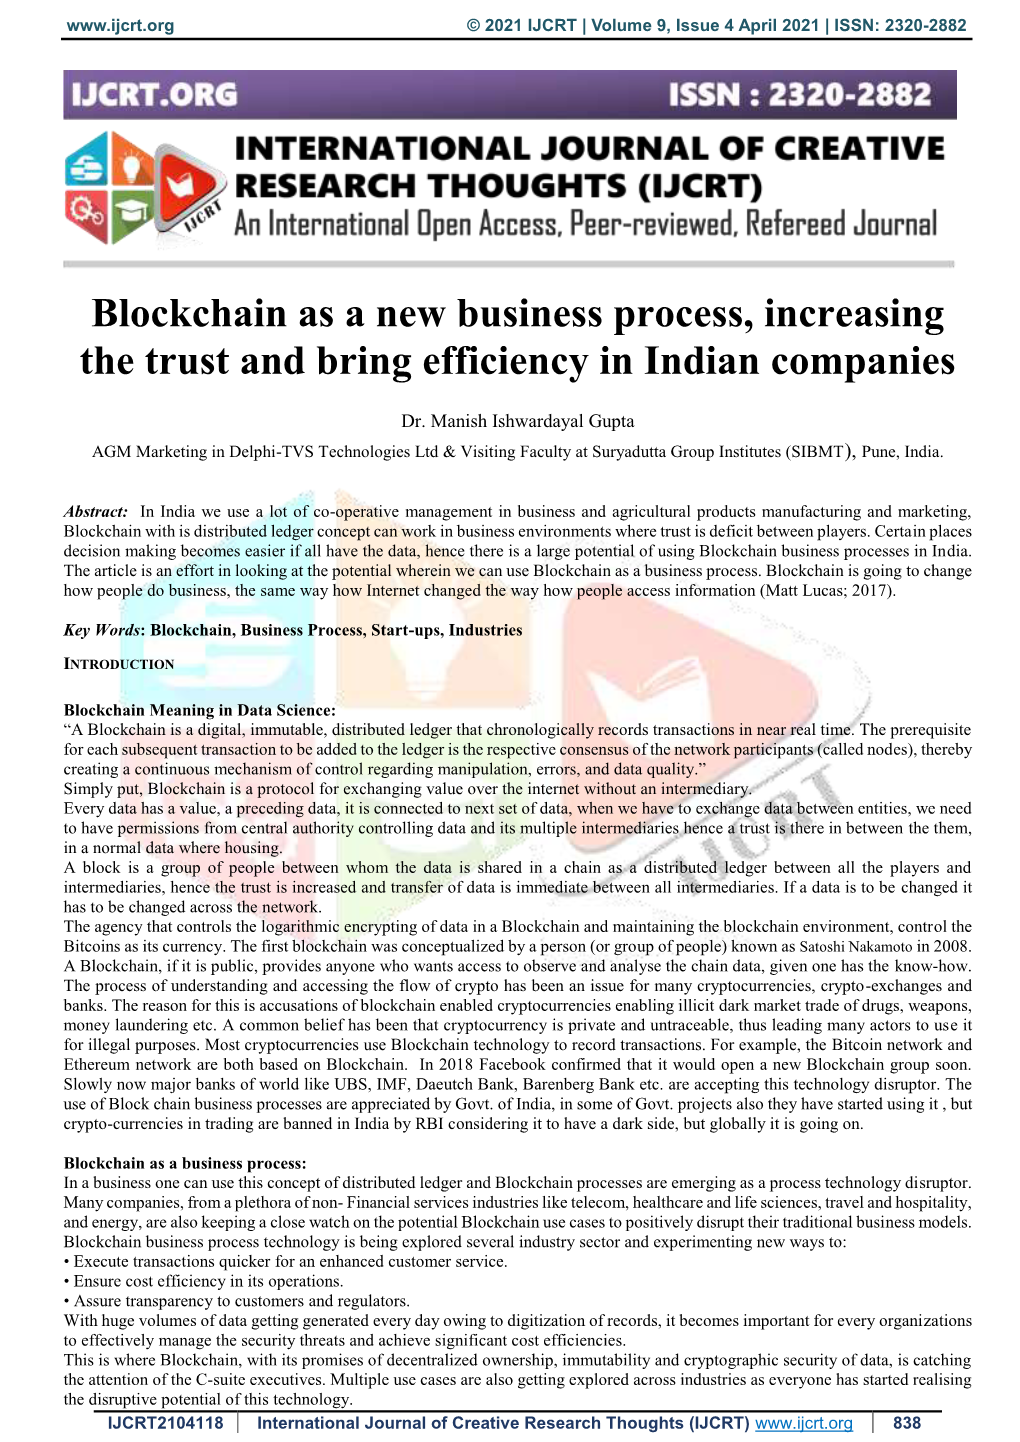 Blockchain As a New Business Process, Increasing the Trust and Bring Efficiency in Indian Companies